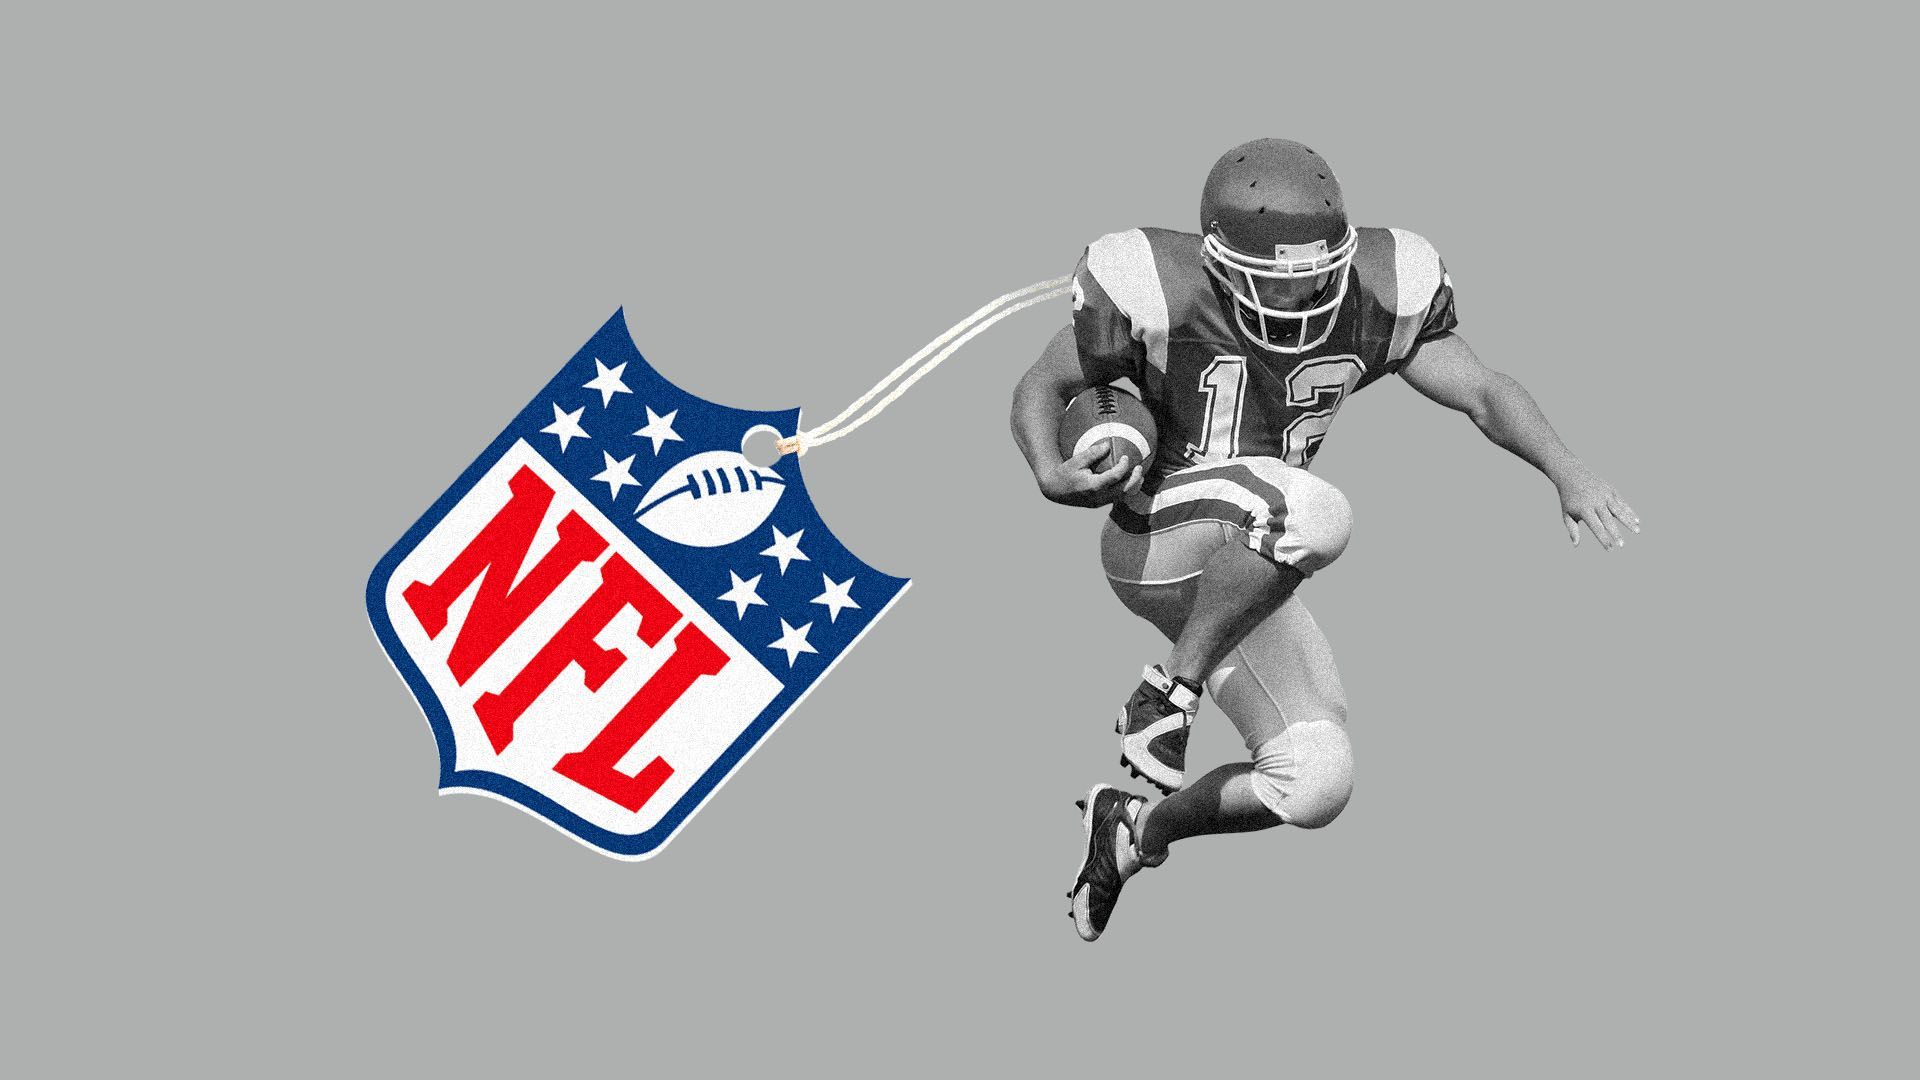 Illustration of football player with giant NFL tag attached to him